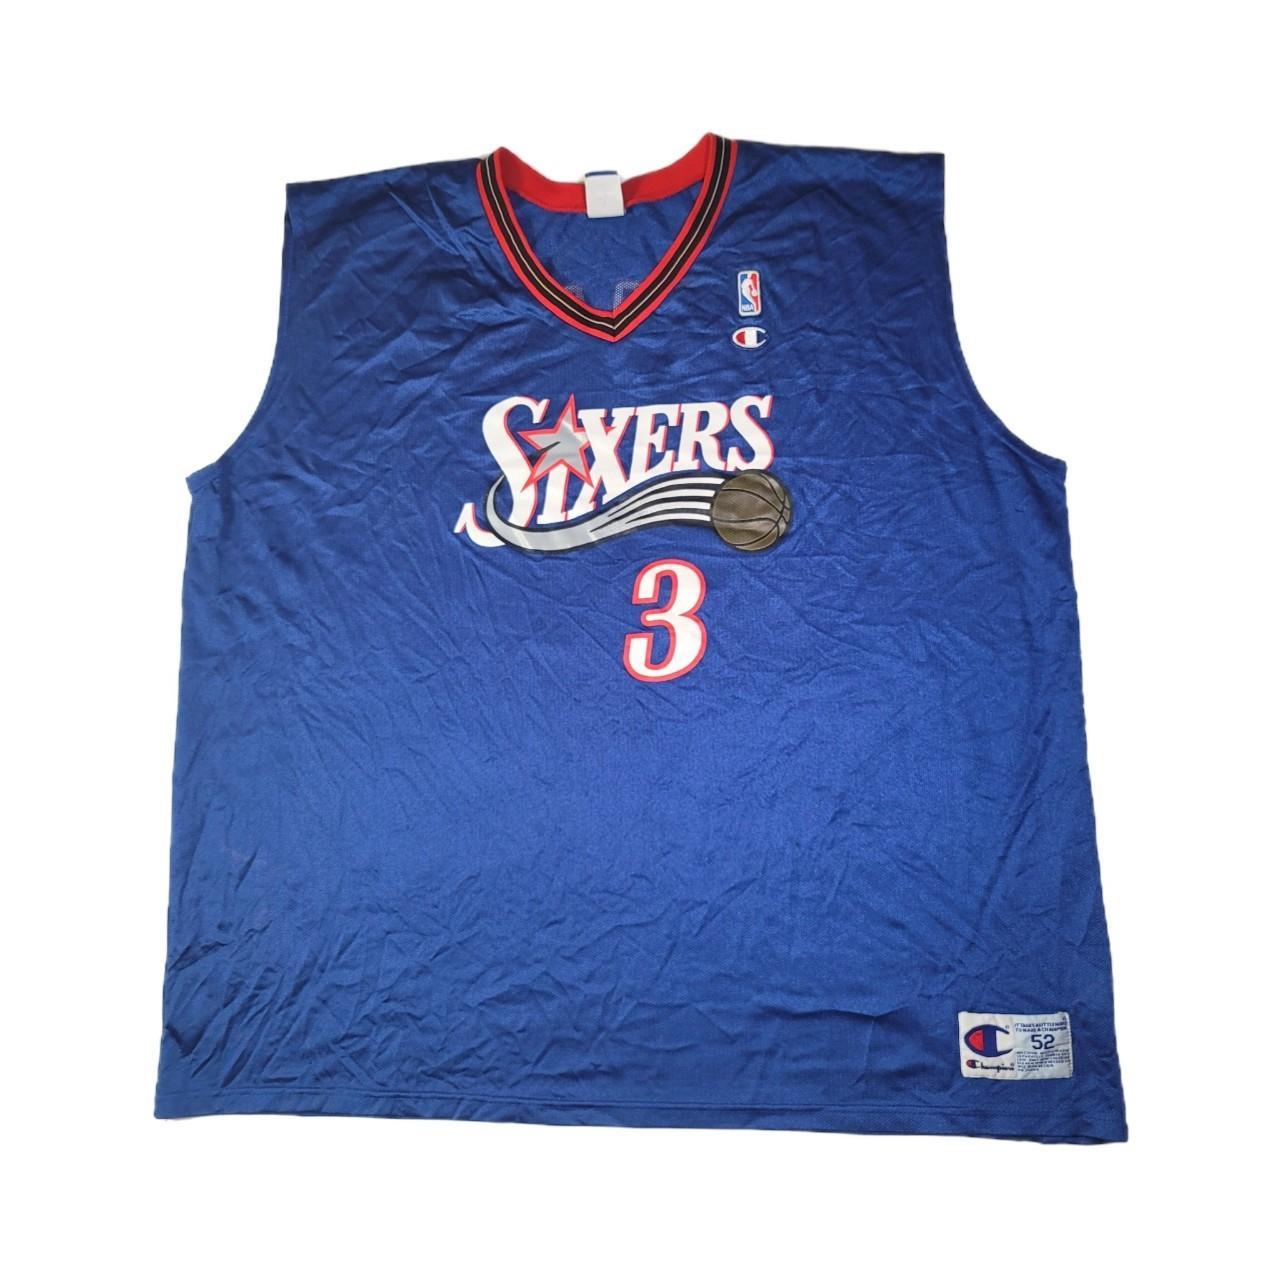 Vintage Allen Iverson Jersey Champion Sixers Shirt Basketball 